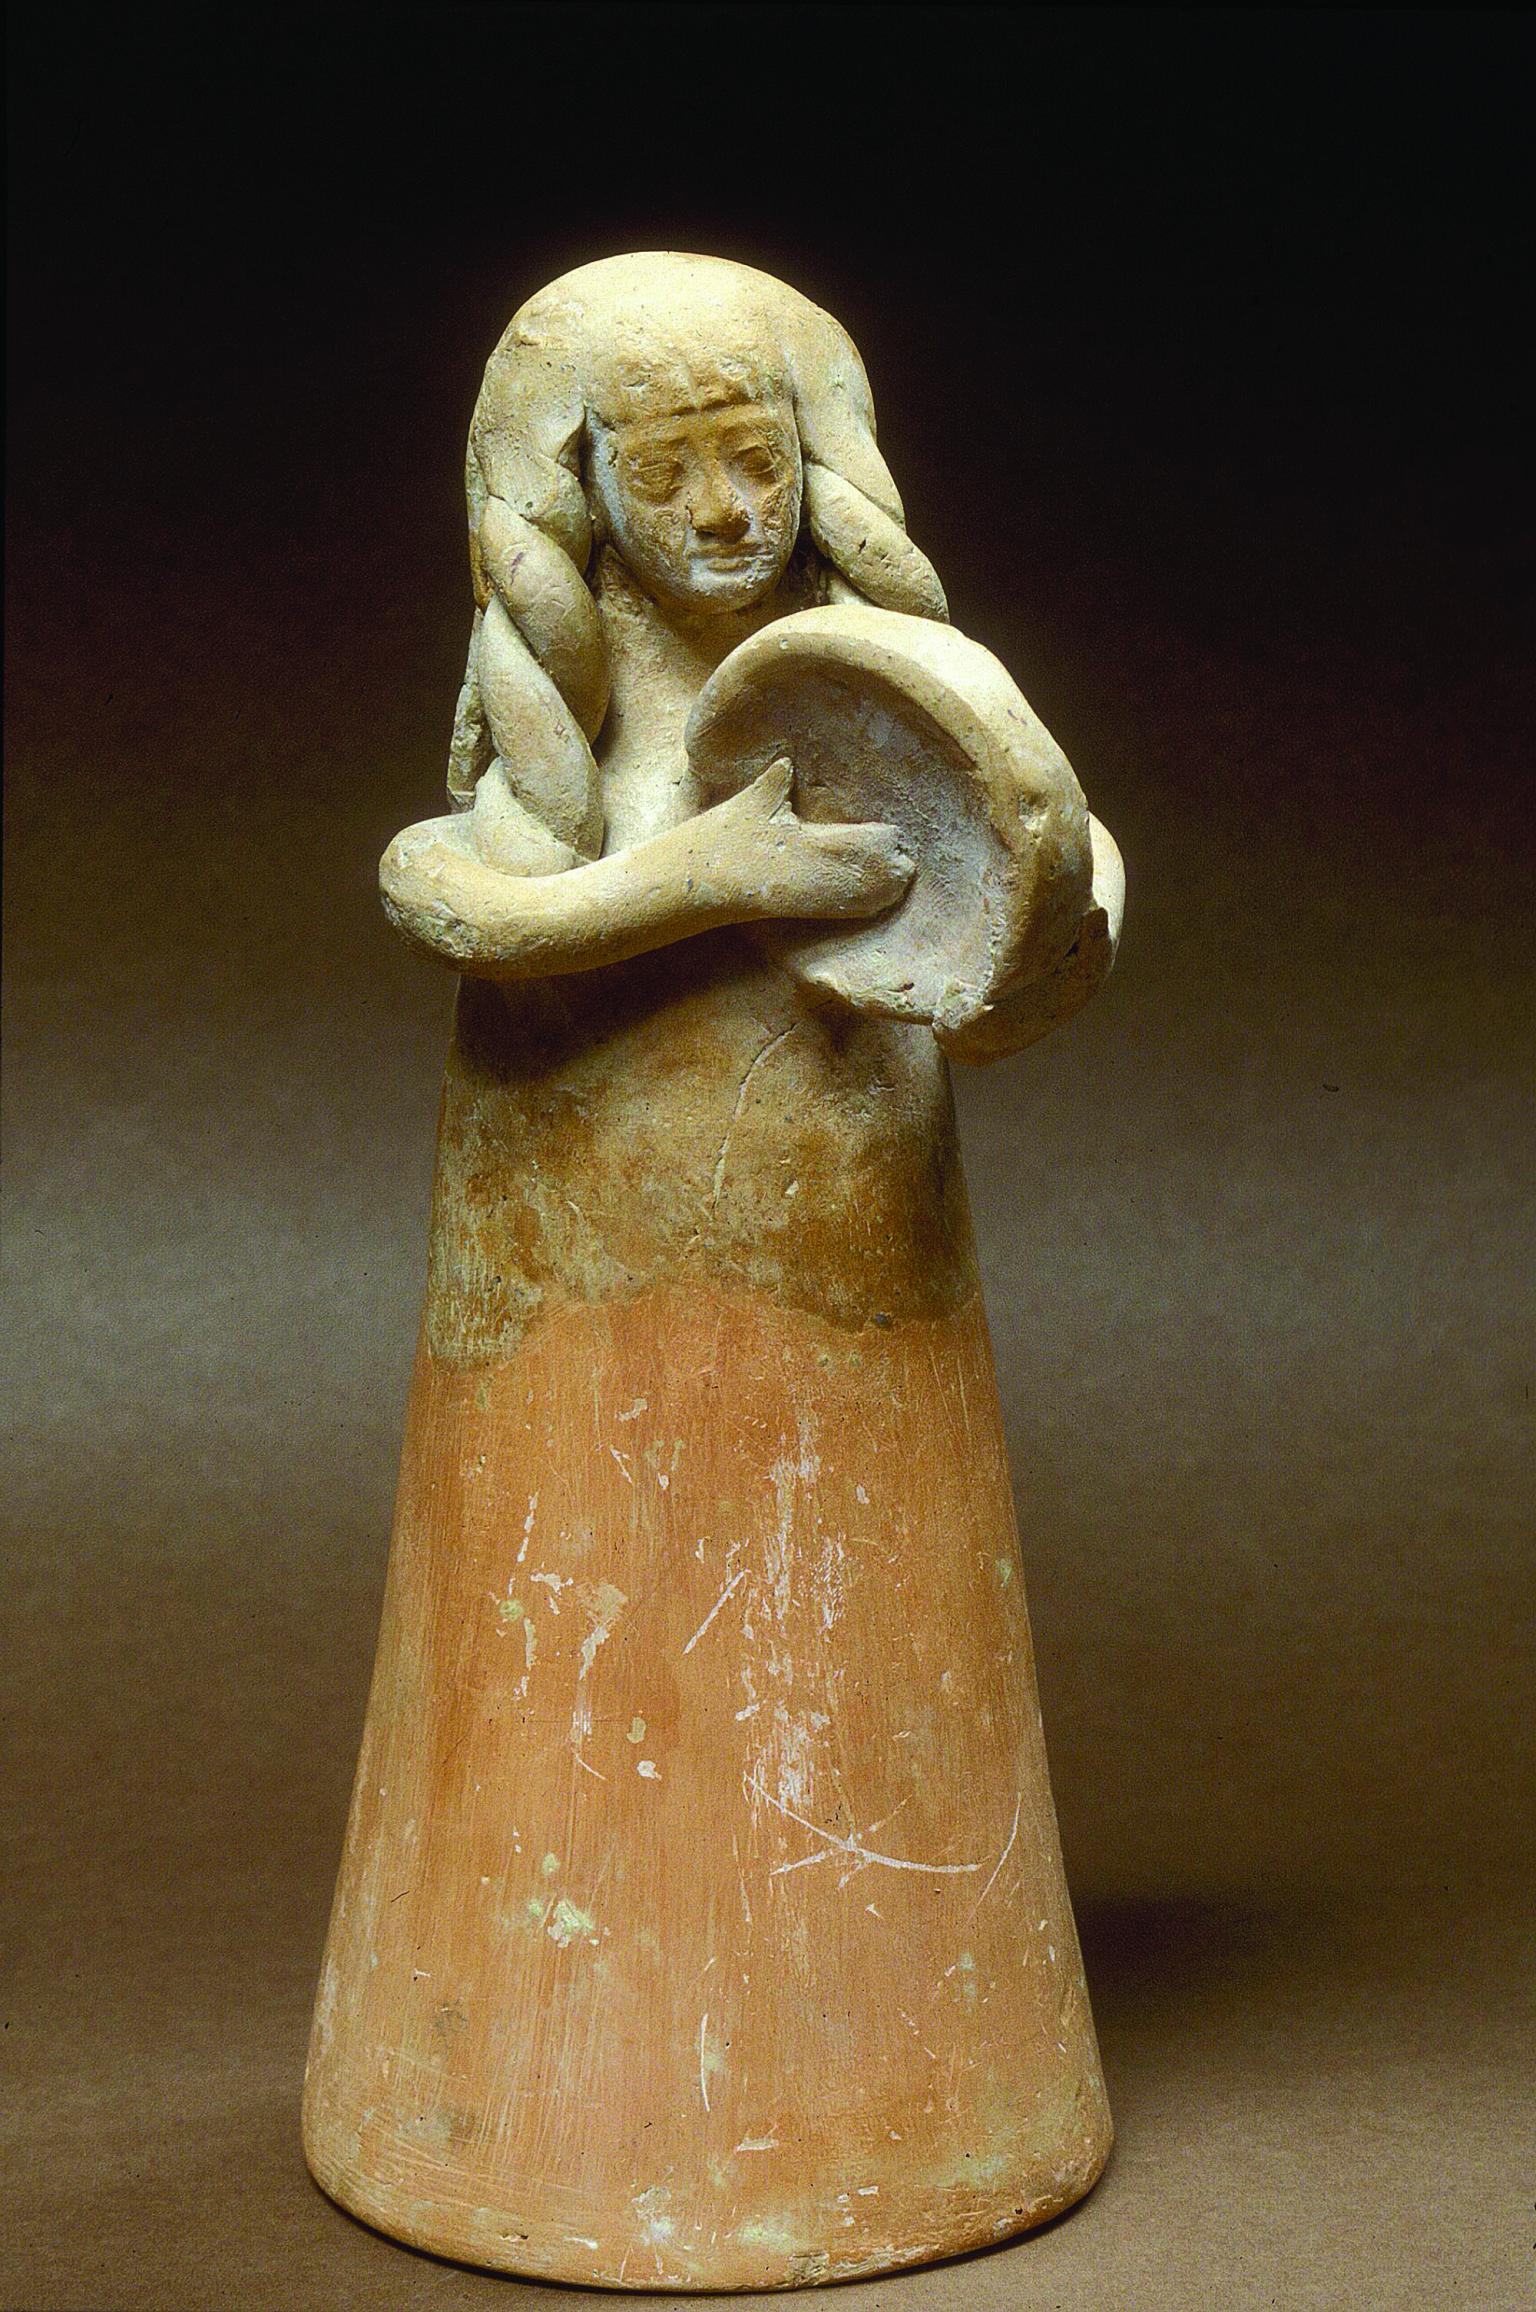 Terra-cotta figurine of women with long hair playing frame drum. 